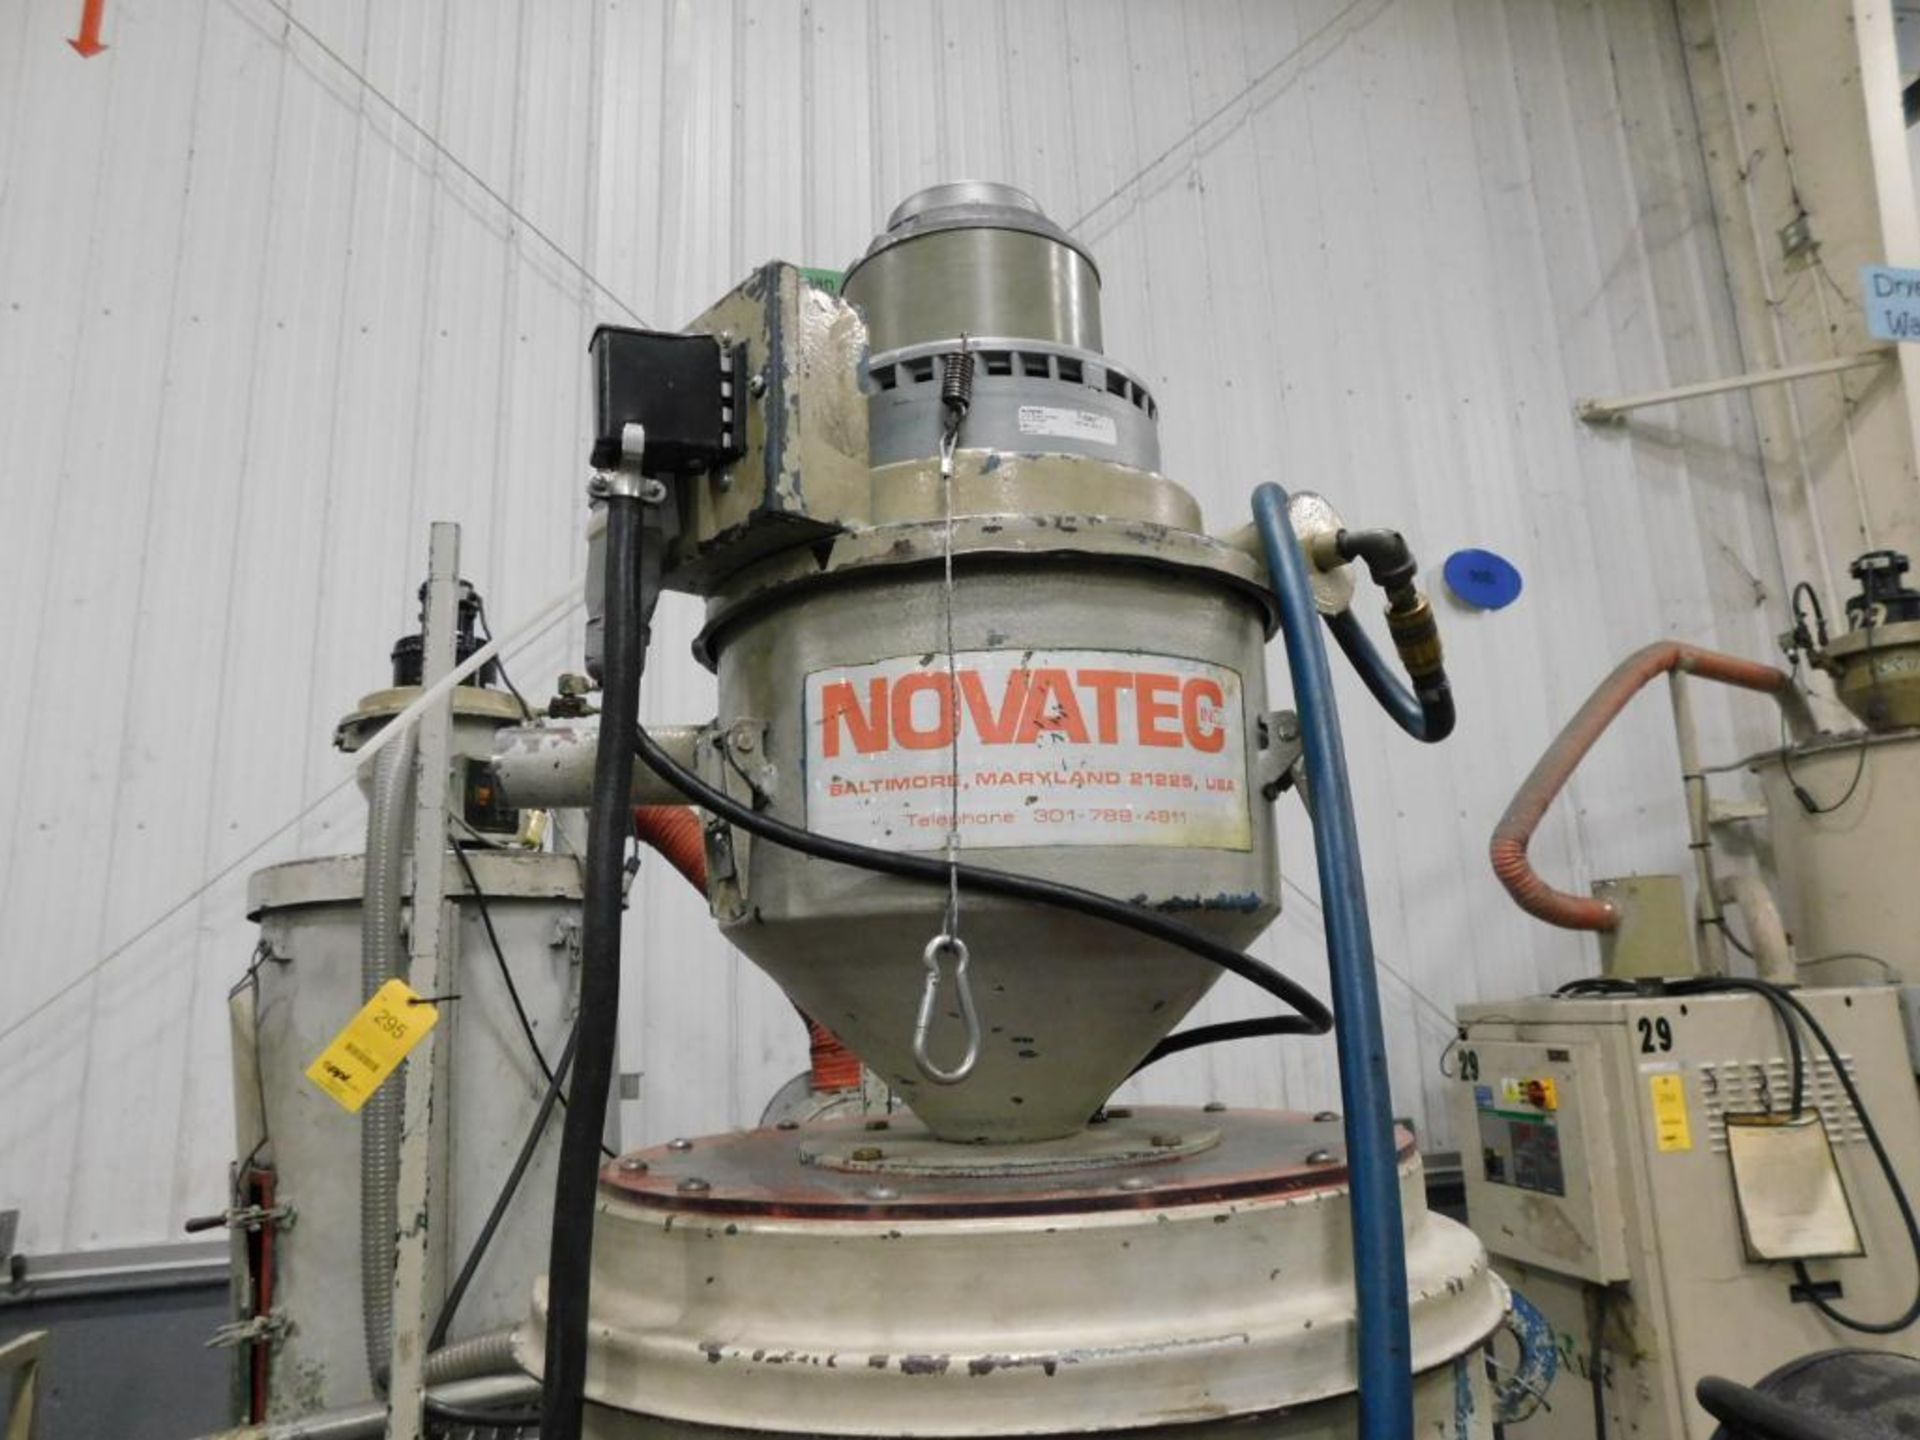 Novatec MD-25 100 Lb. Portable Material Dryer, S/N 3-4126-1426 - Image 7 of 7